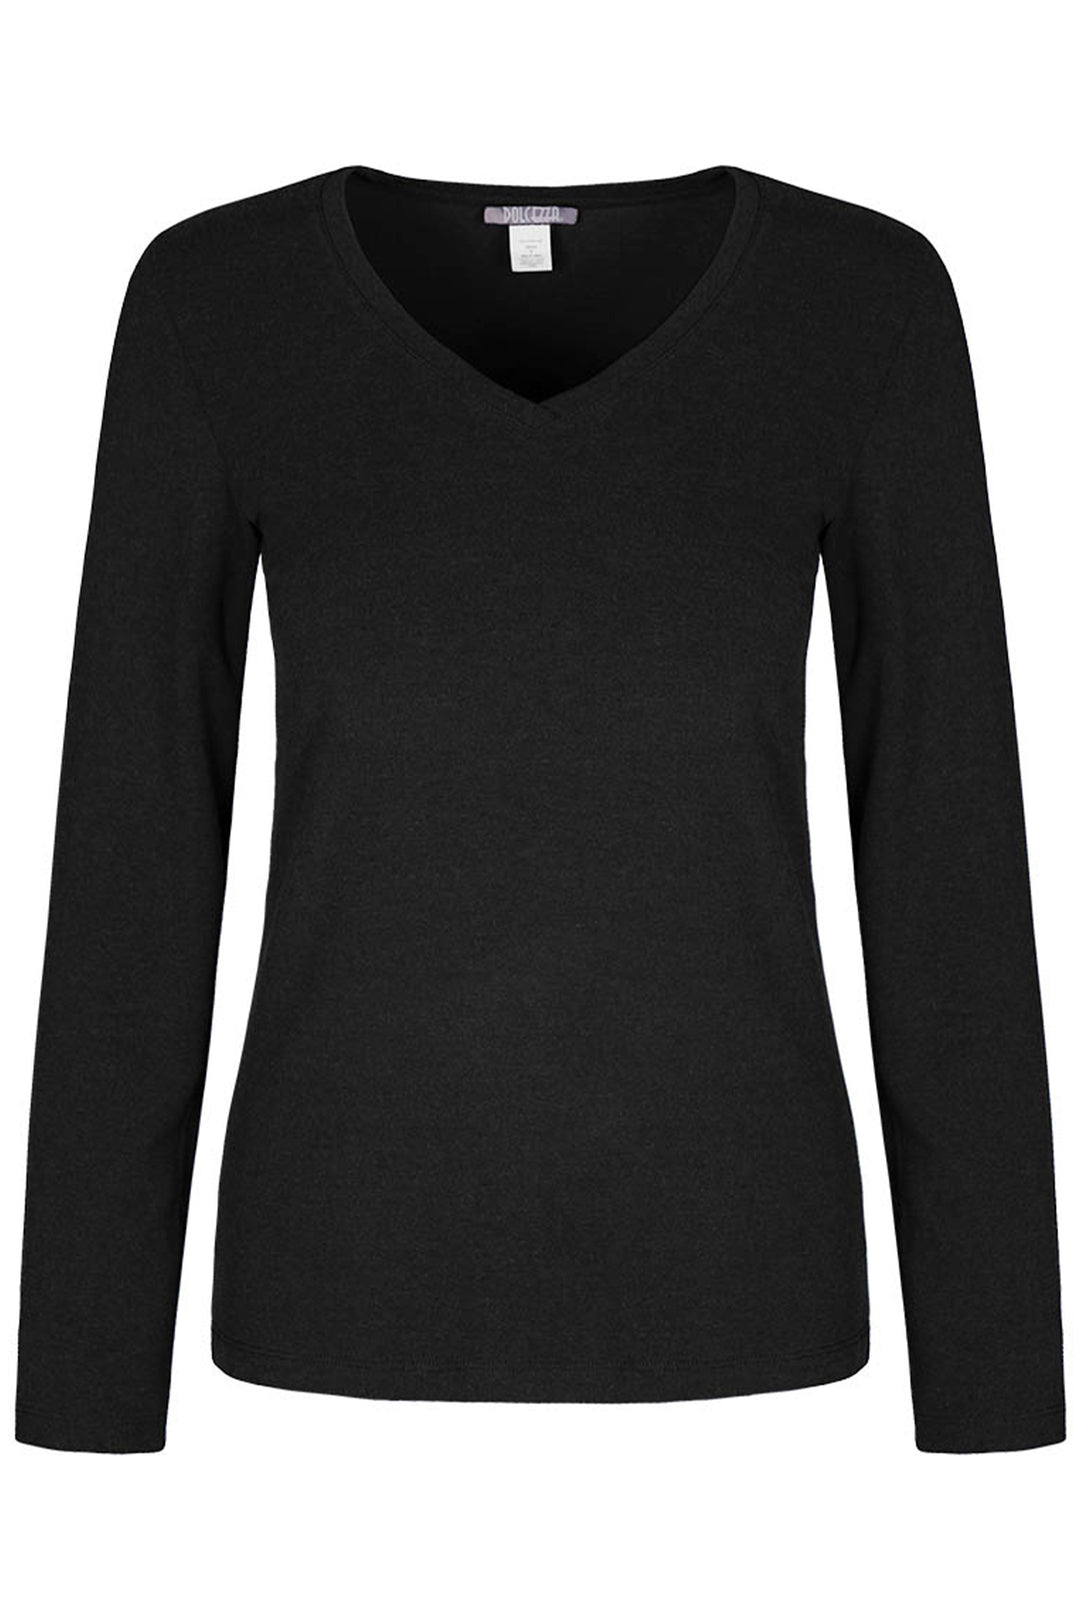 Dolcezza women's long sleeve V-neck cotton top - charcoal front